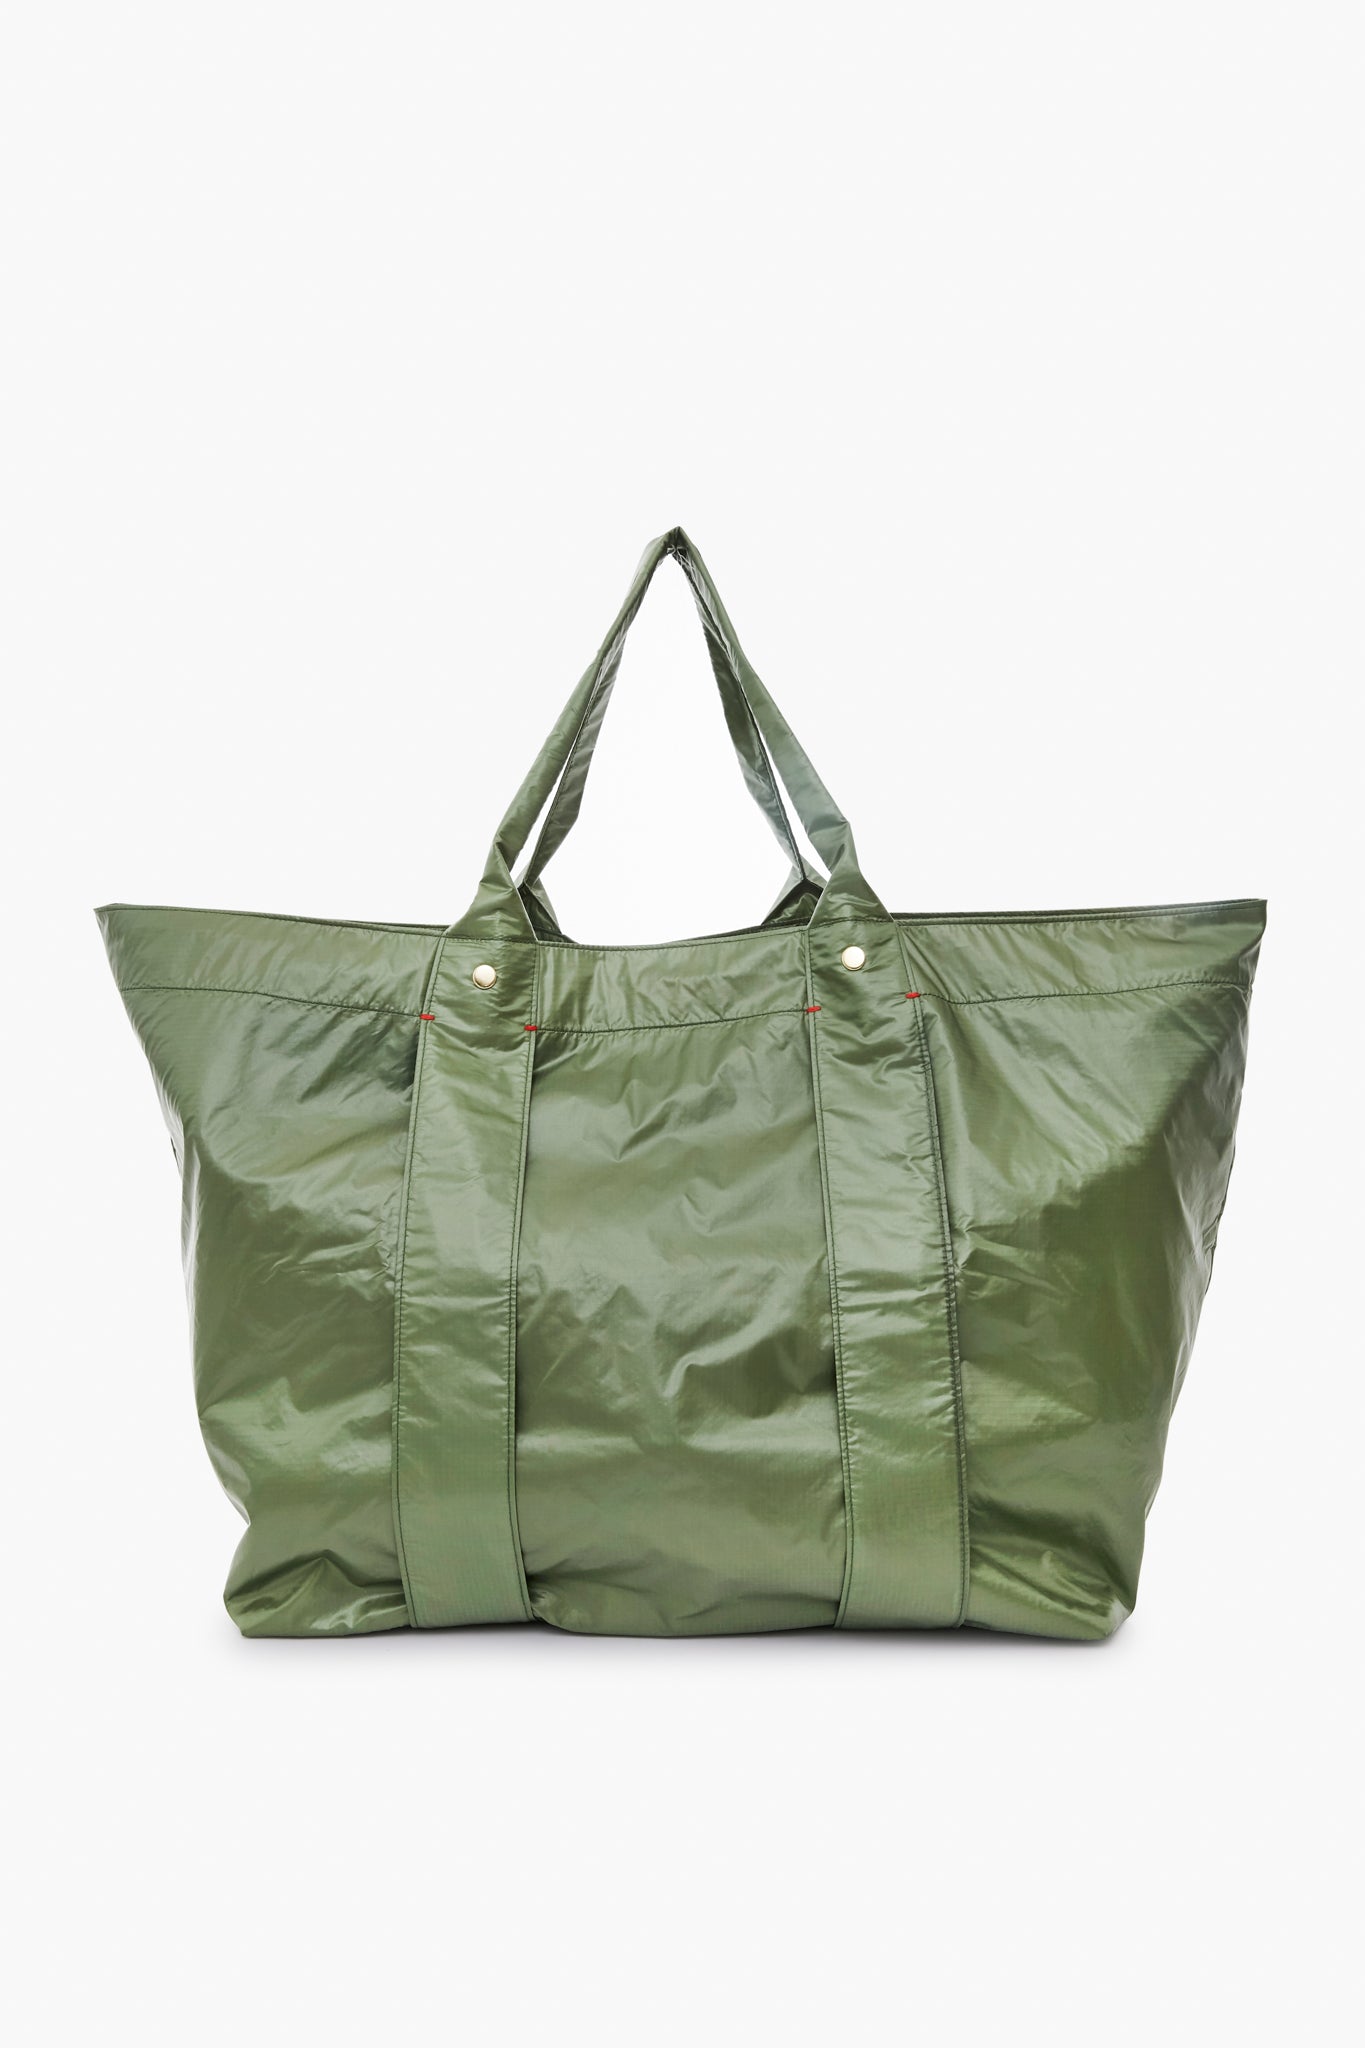 Clare V. Giant Trop Tote